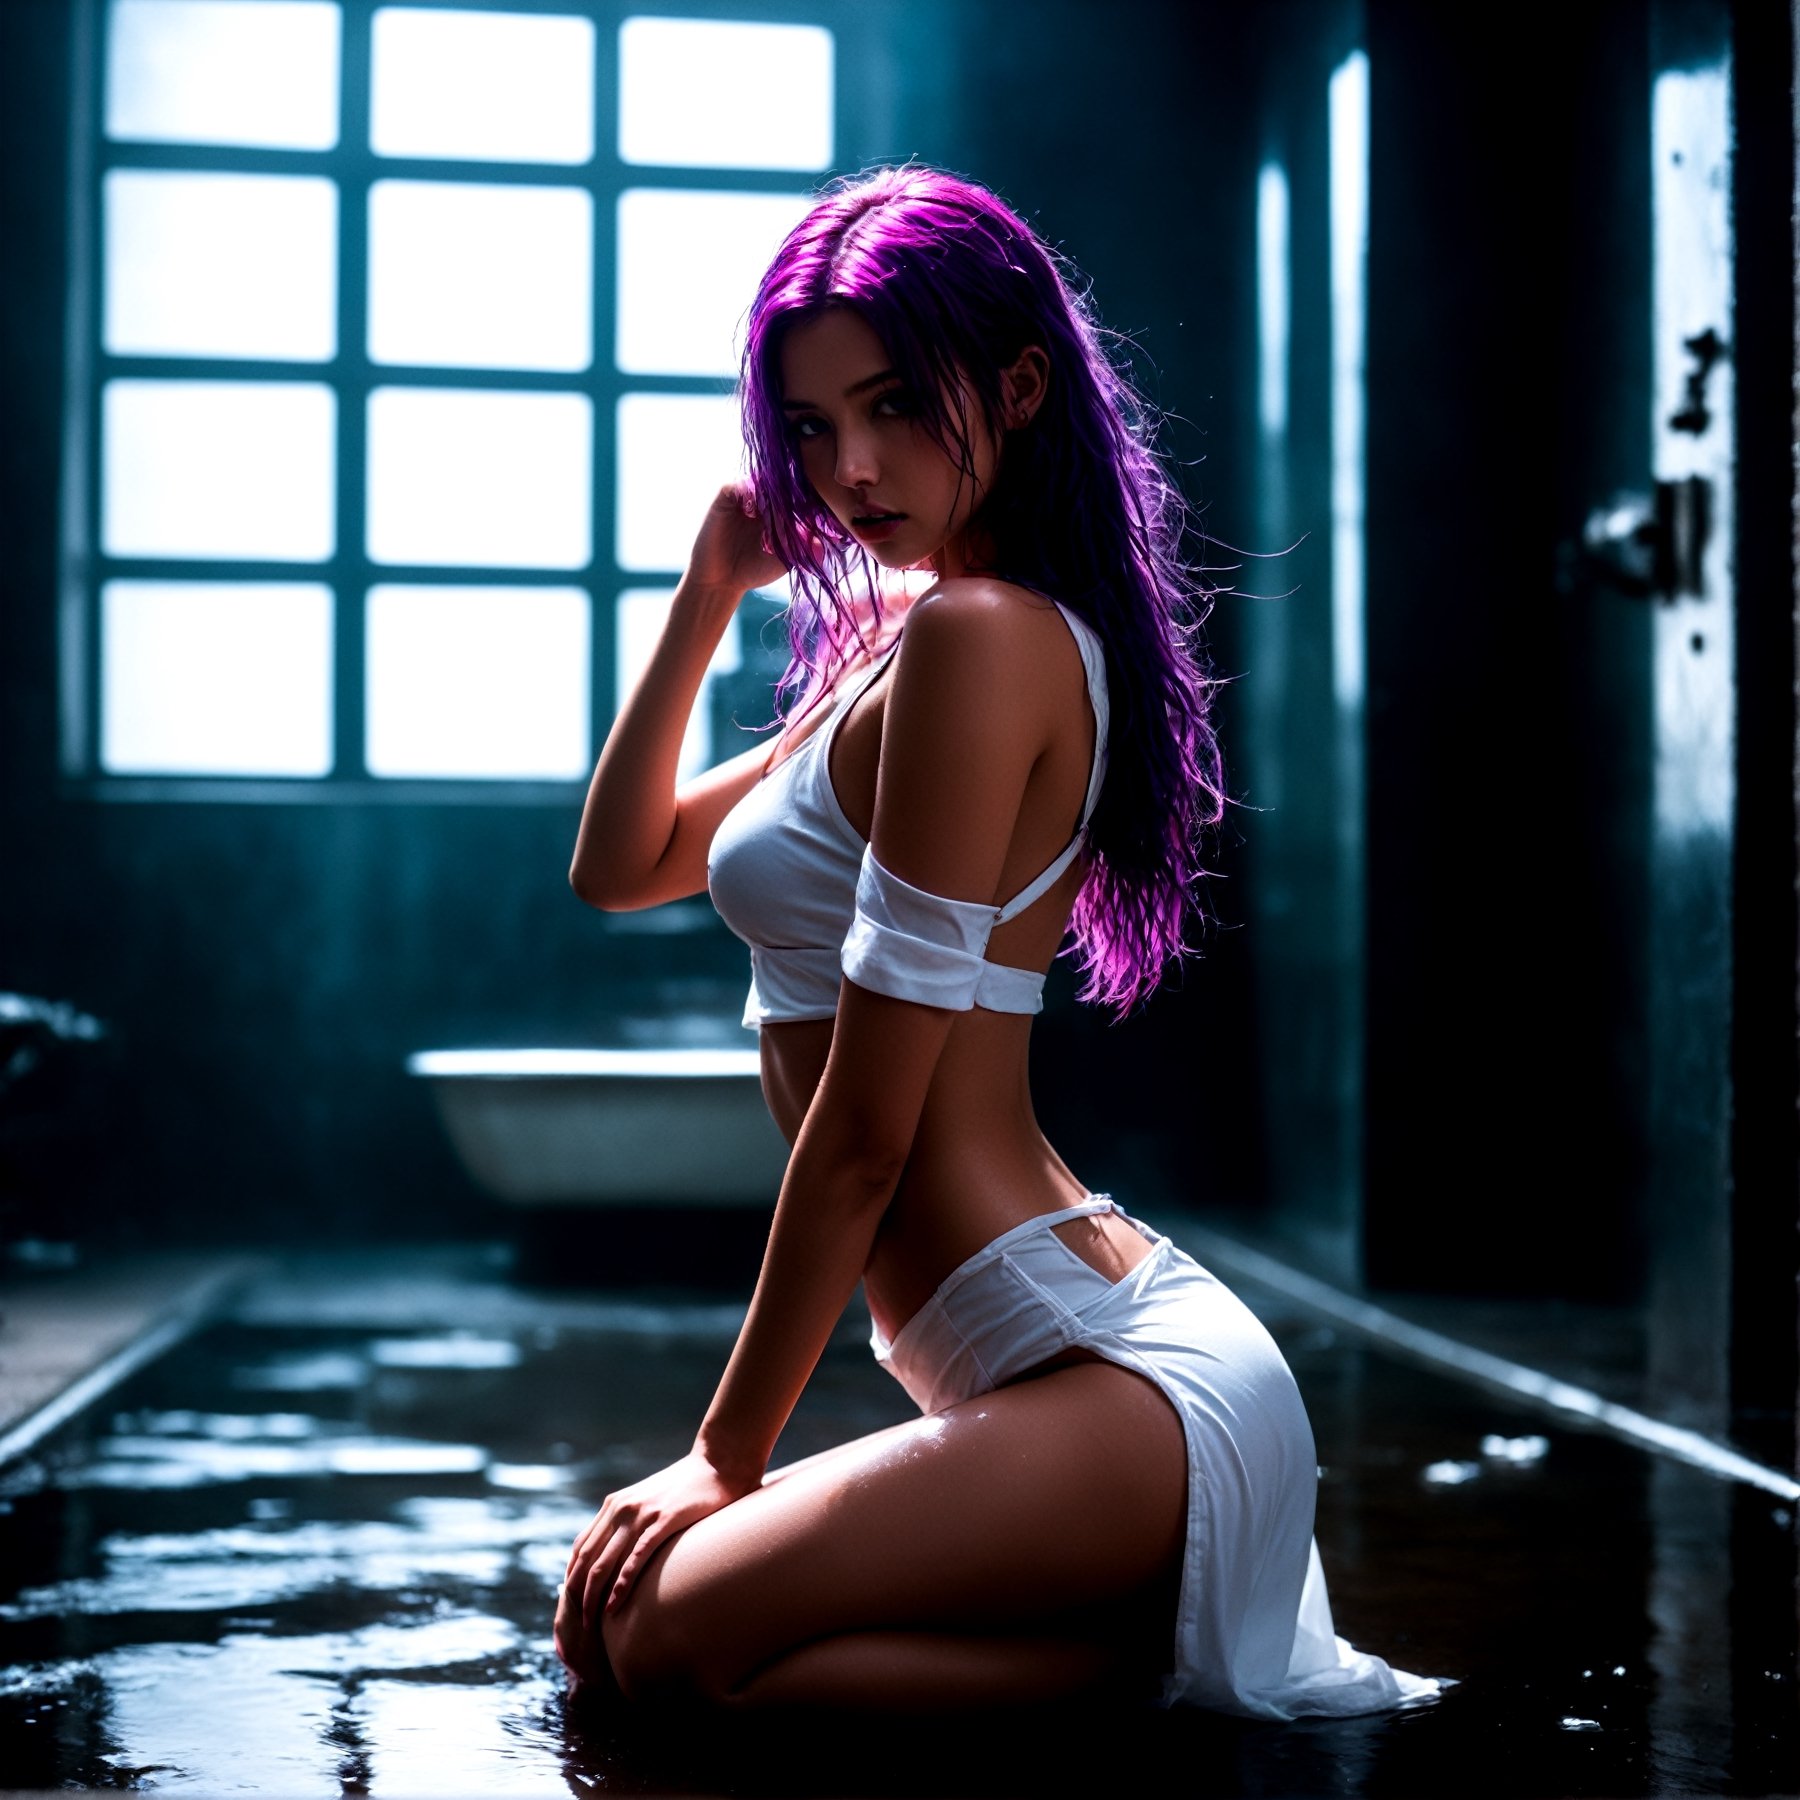 NSFW, Fashion photography portrait, full body, beautiful TWbabeXL01, purple hair, sweating, in a soak dirty white dress shirt with water, transparent, no bra, bottomless, no underwear, sexy look, wet body with sweats and water drops, wet hair, (lofi, analog), kodak film by Stephen Wayda, in an old and dark shower room, dirty water, neon, showering from ceiling, mirror in the back, light on face:1.2, dynamic poses, 1girl, floating hairs, (RAW photo:1.2), (photorealistic:1.4), (masterpiece:1.3), (intricate details:1.2), (24 years old female), sunny, ruins, petite, medium breasts, narrow waist, (looking_at_viewer:1.4), from_front, slim_legs, (best quality:1.4), (ultra highres:1.2), cinema light, (extreme detailed illustration), (lipgloss, eyelashes, best quality, ultra highres, depth of field, caustics, Broad lighting, shading, 85mm, f/1.4, ISO 200, 1/160s:0.75), cyberpunk interior, one storm trooper arm, In the background, a swirling vortex of energy seems to be brewing, lora:TWbabeXL01:0.7
